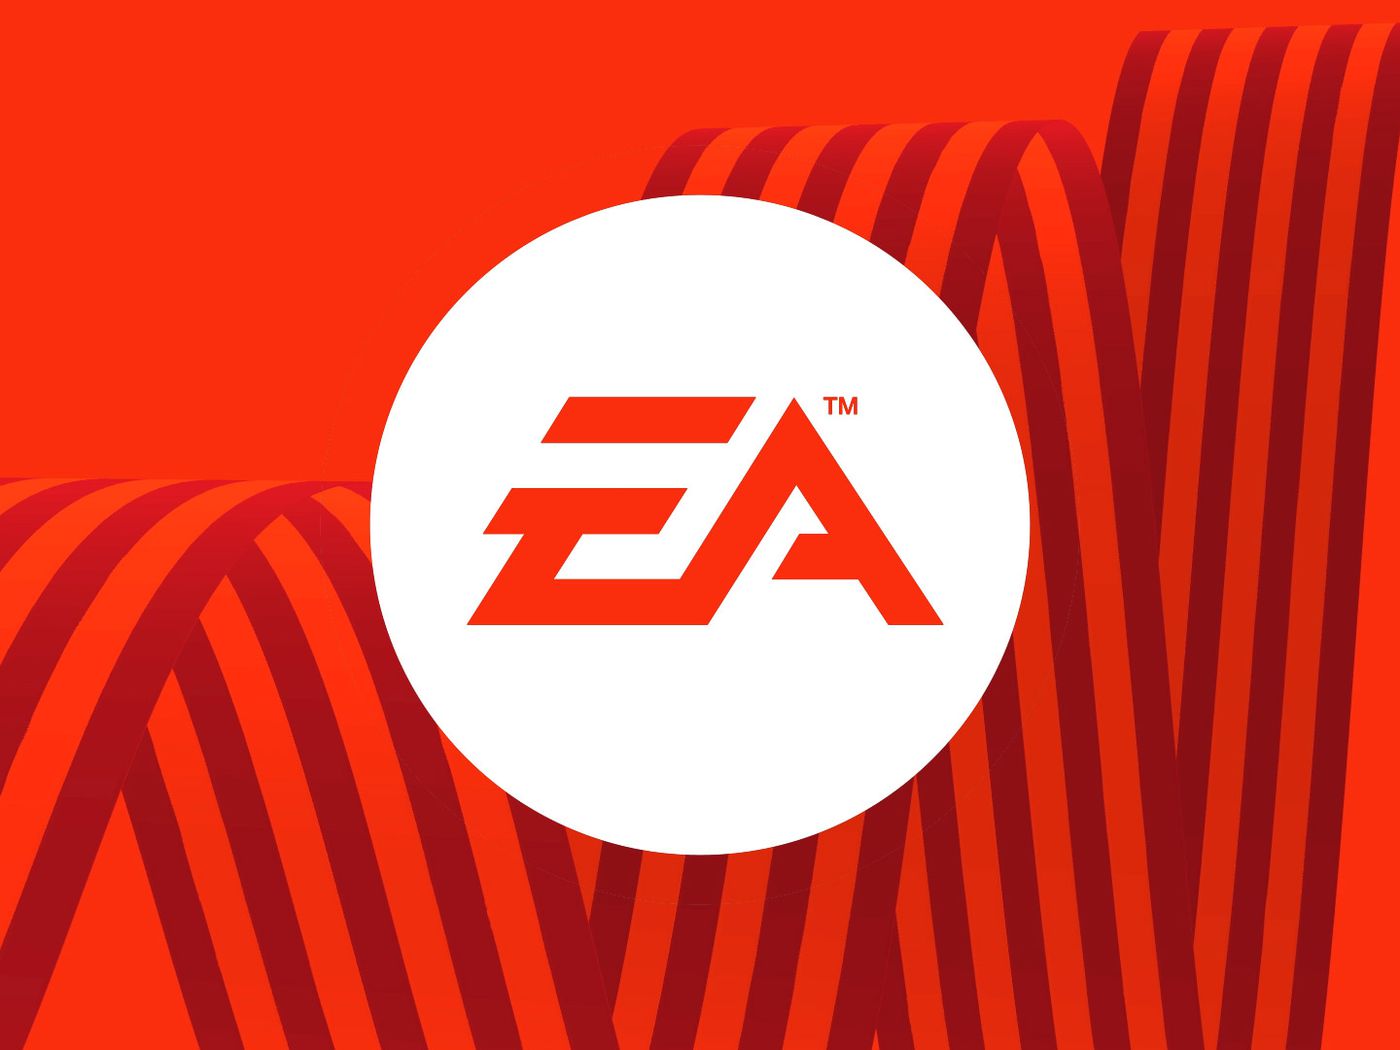 Electronic Arts announces dates for EA Play 2017